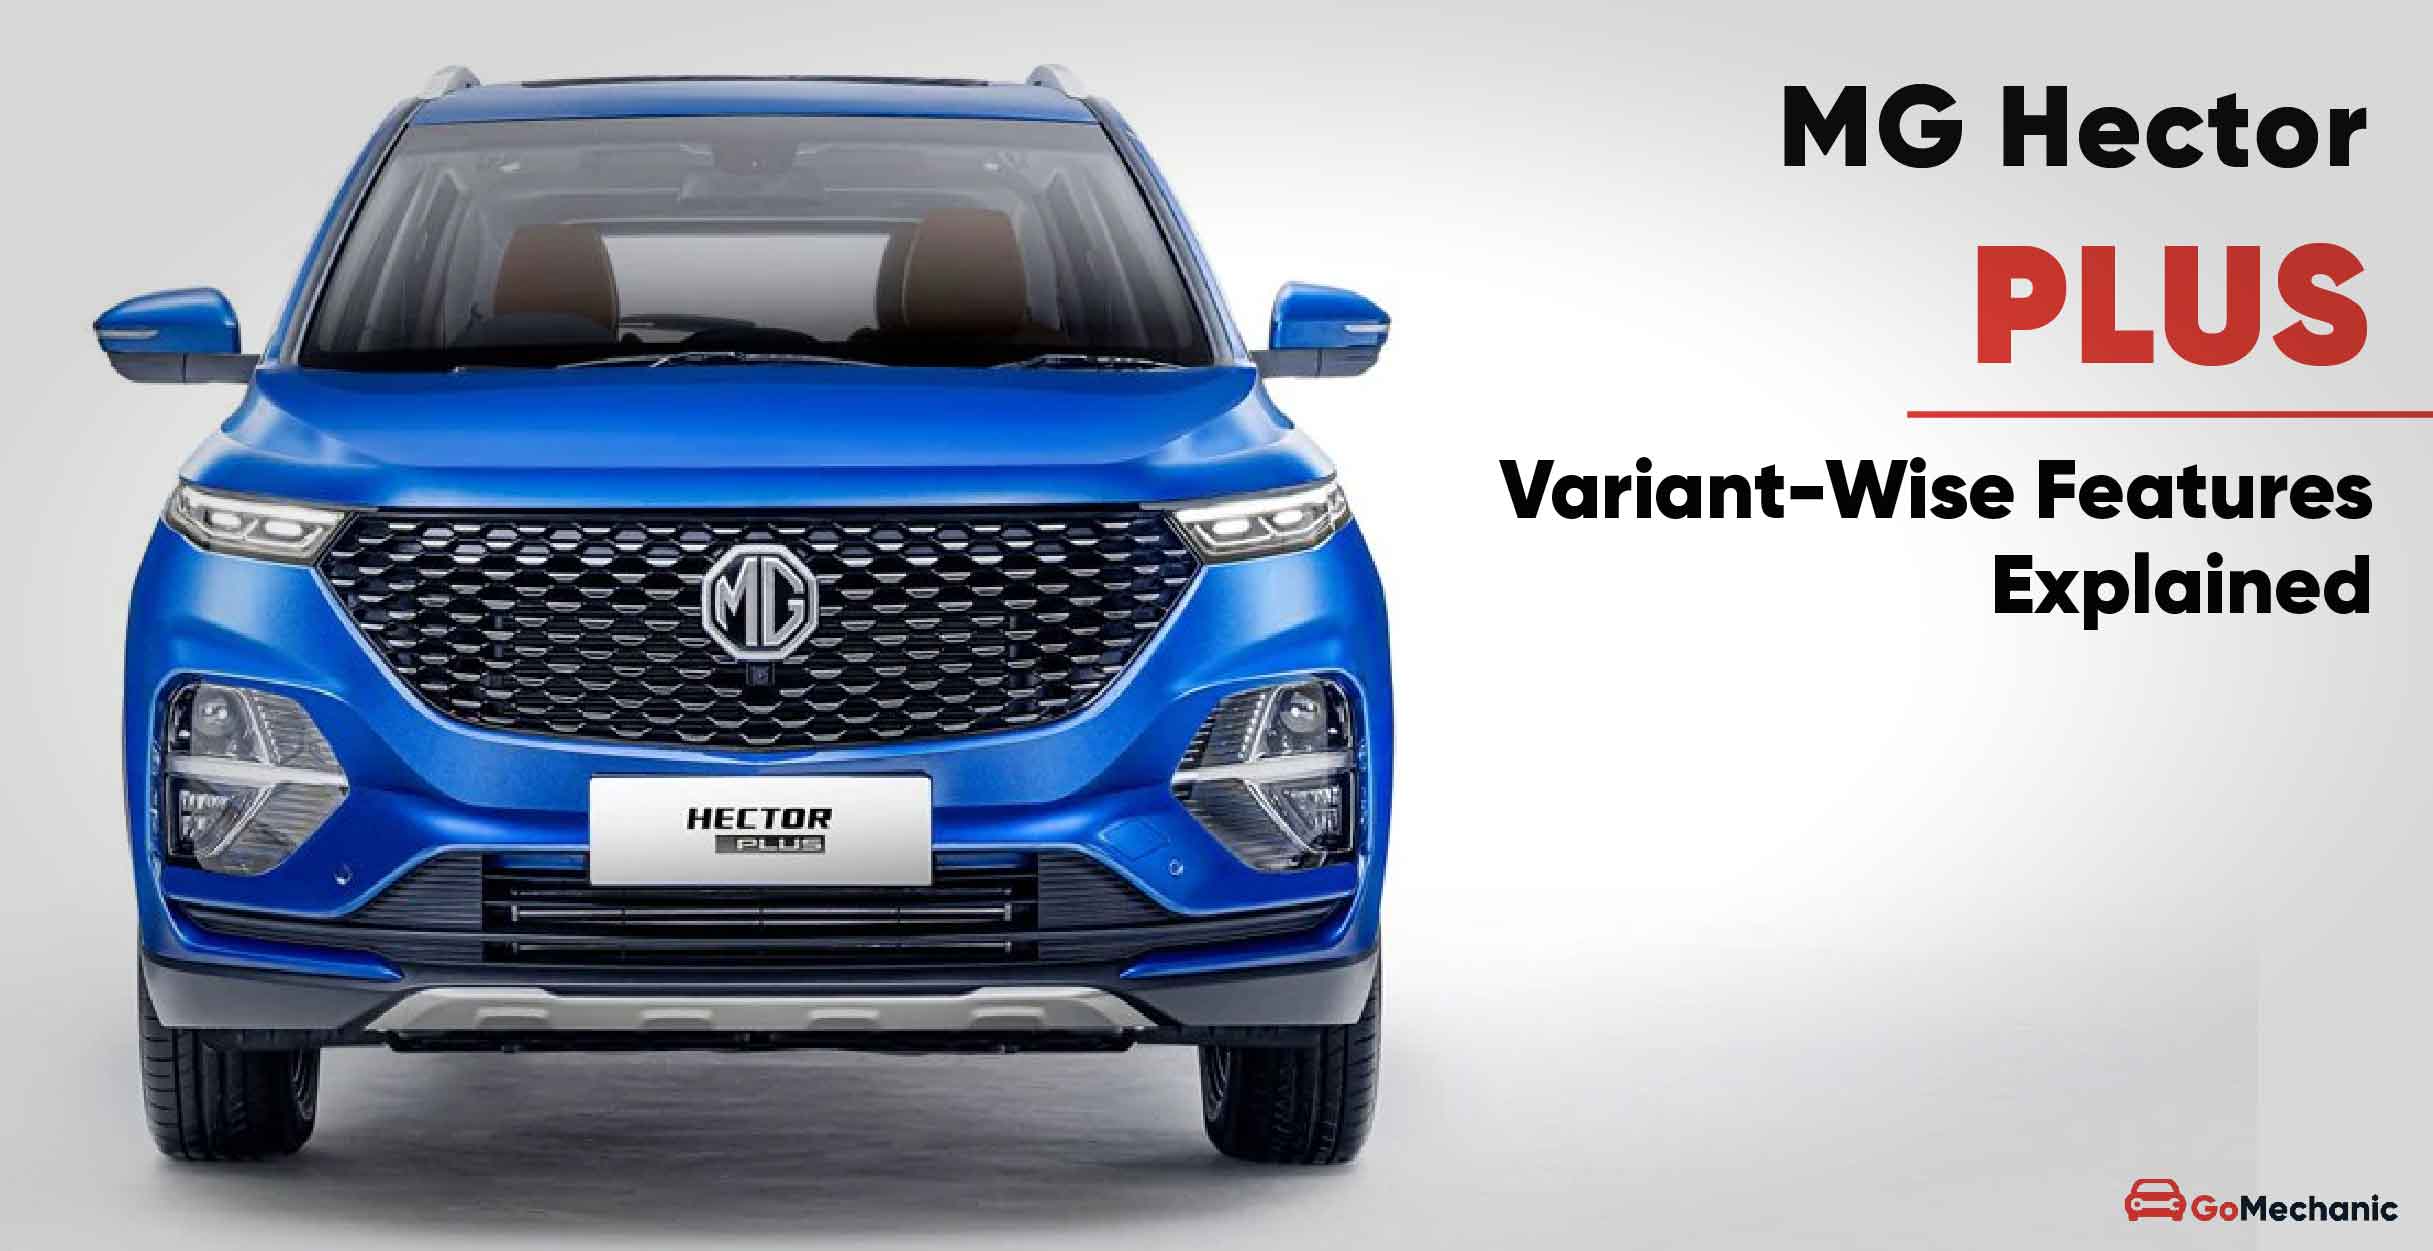 mg hector plus variants-wise features explained